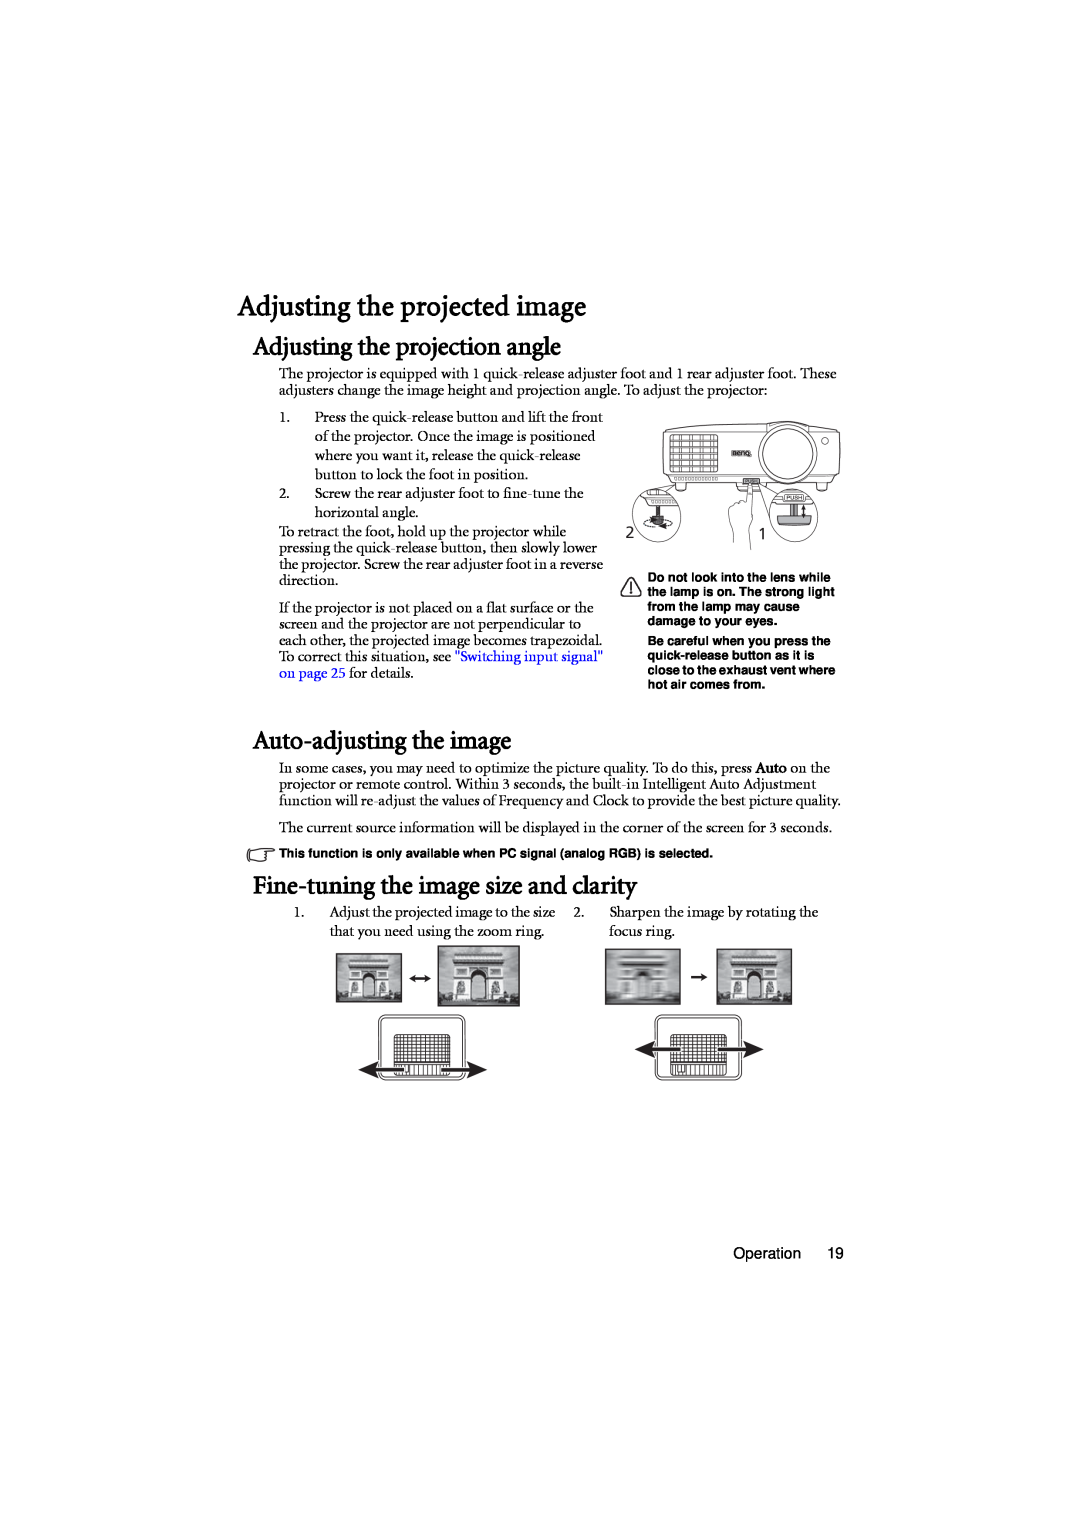 BenQ MX701 user manual Adjusting the projected image, Adjusting the projection angle, Auto-adjustingthe image 